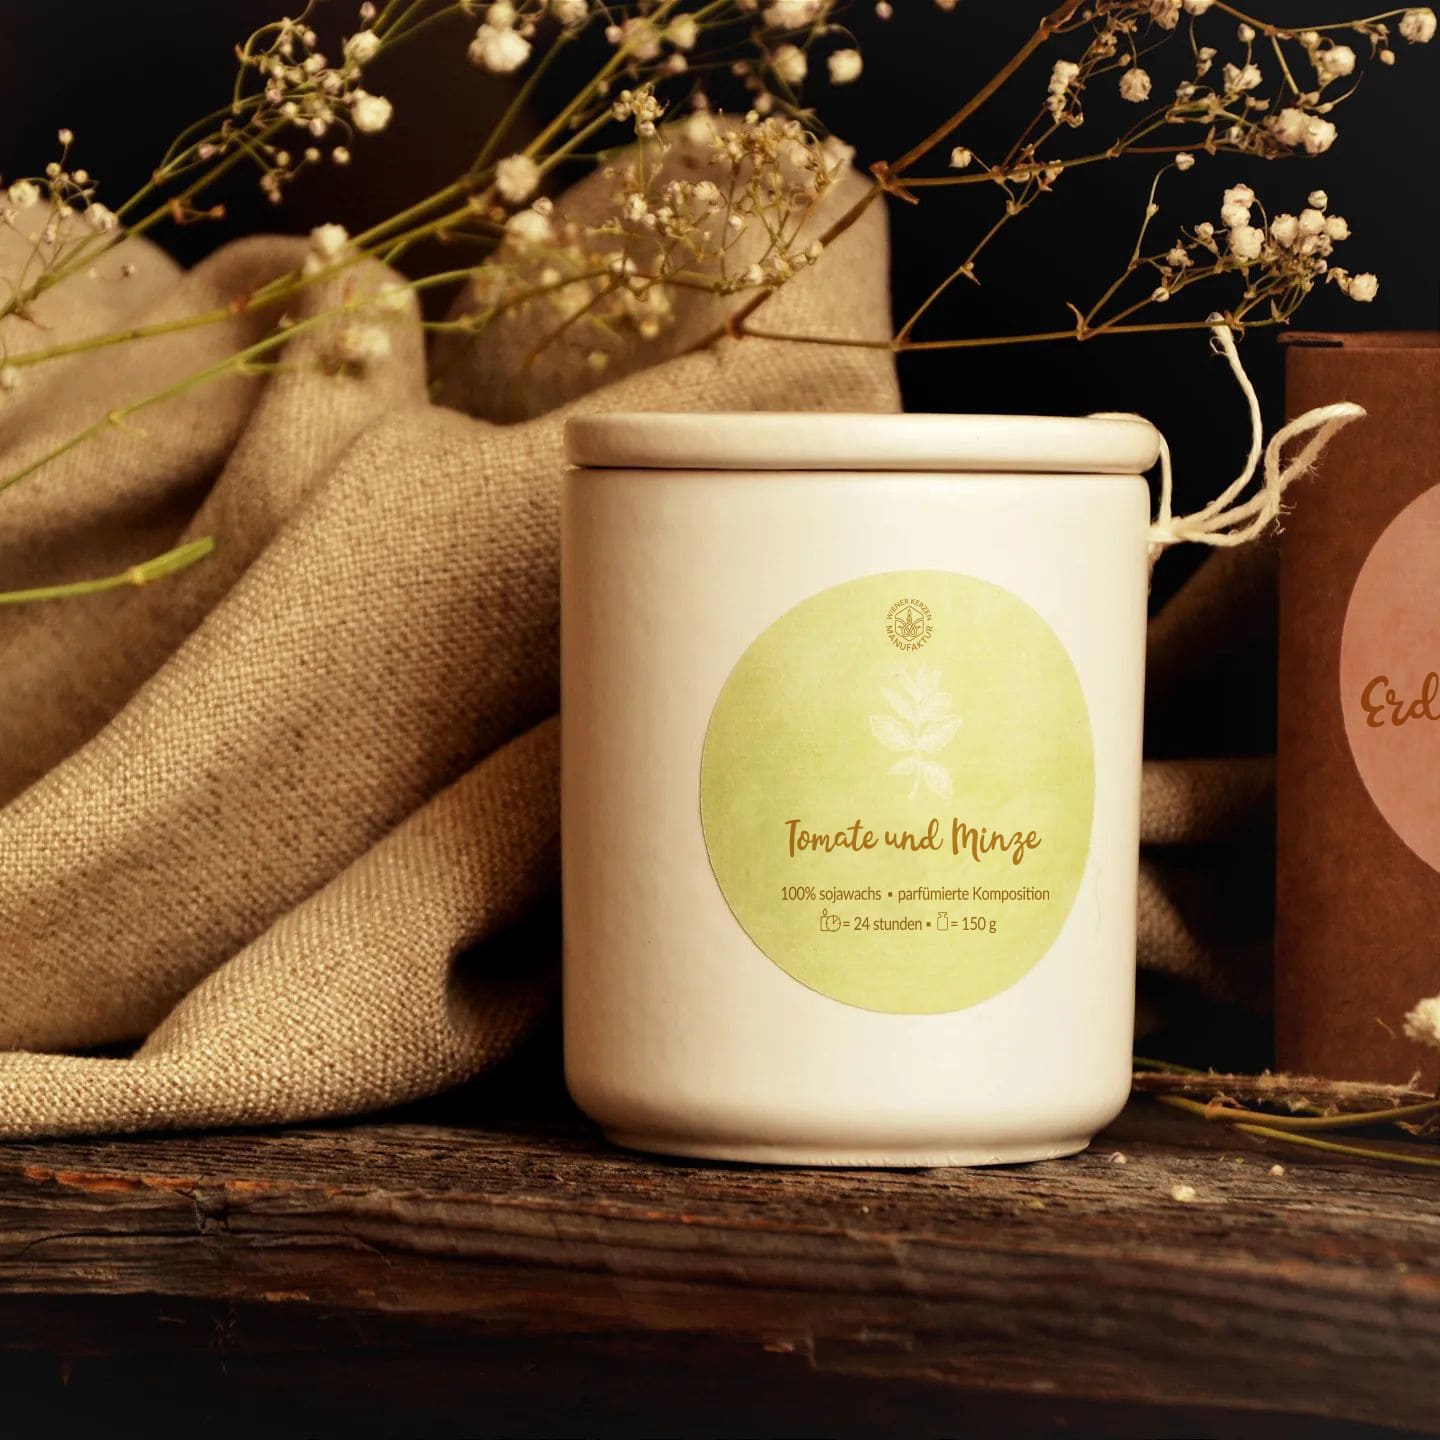 Soy-wax candle with “Tomato & Mint” aroma